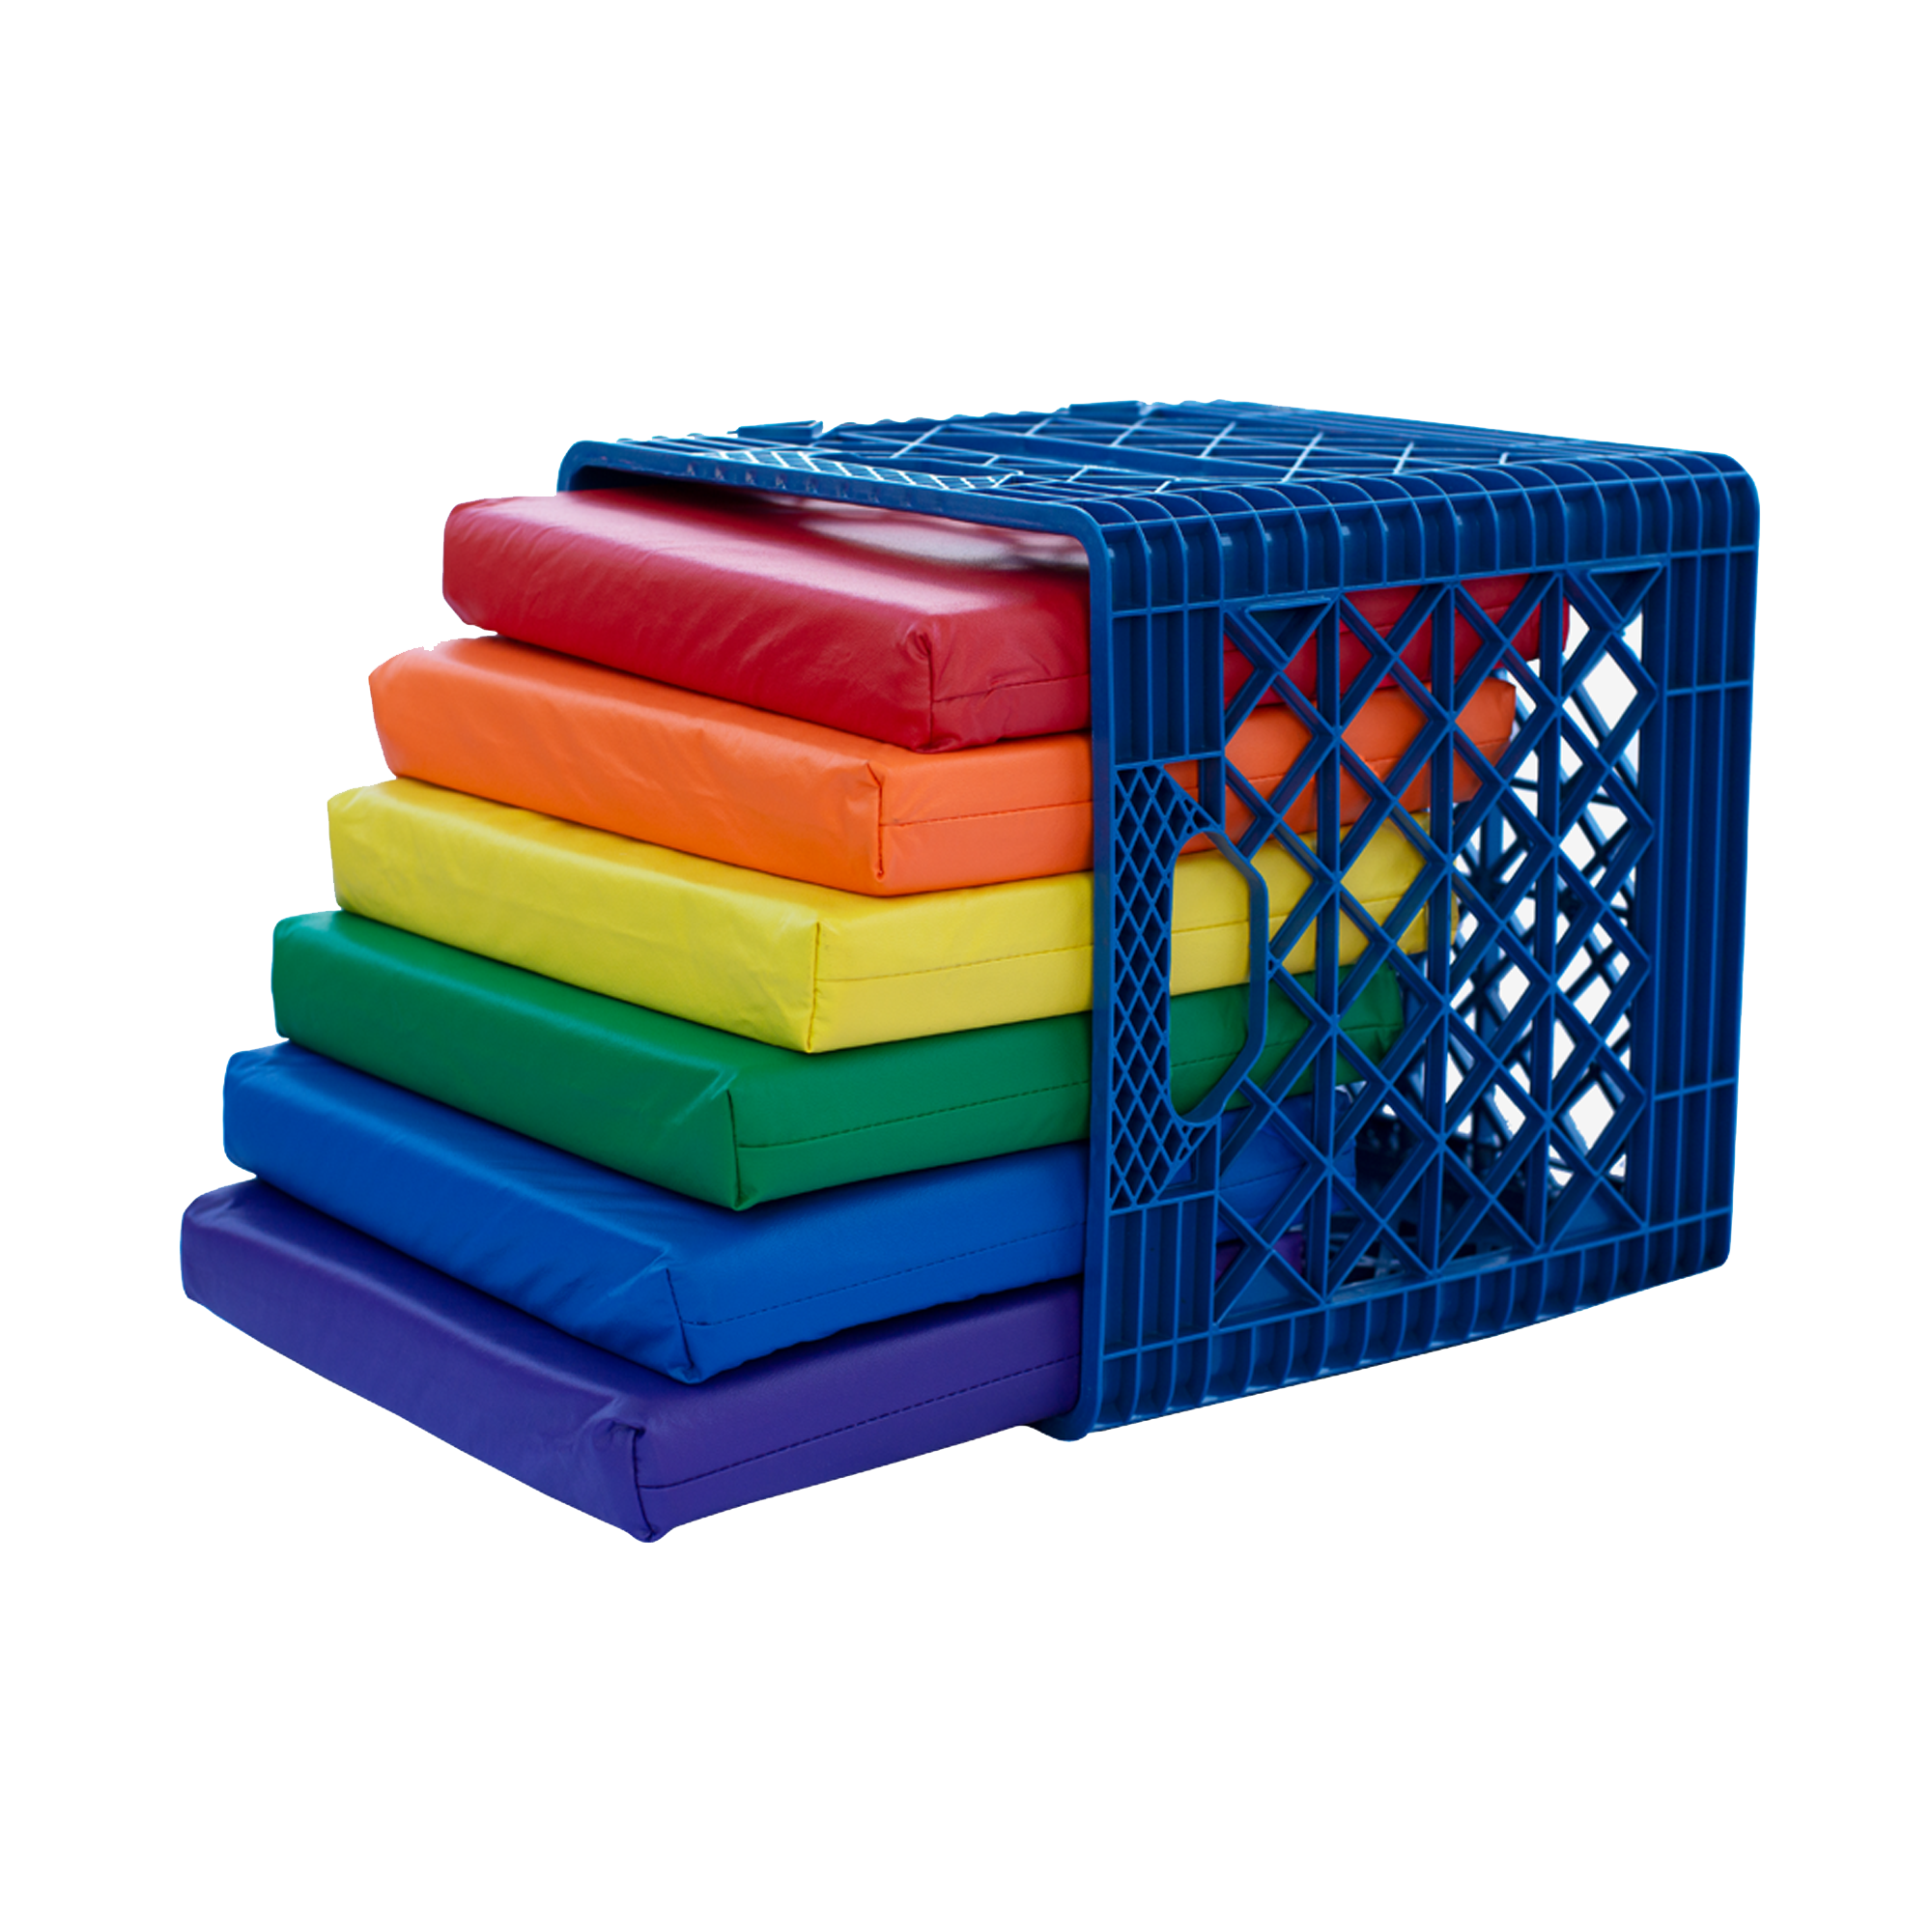 KINDERCRATE WITH 6 SQUARE KINDERCUSHIONS